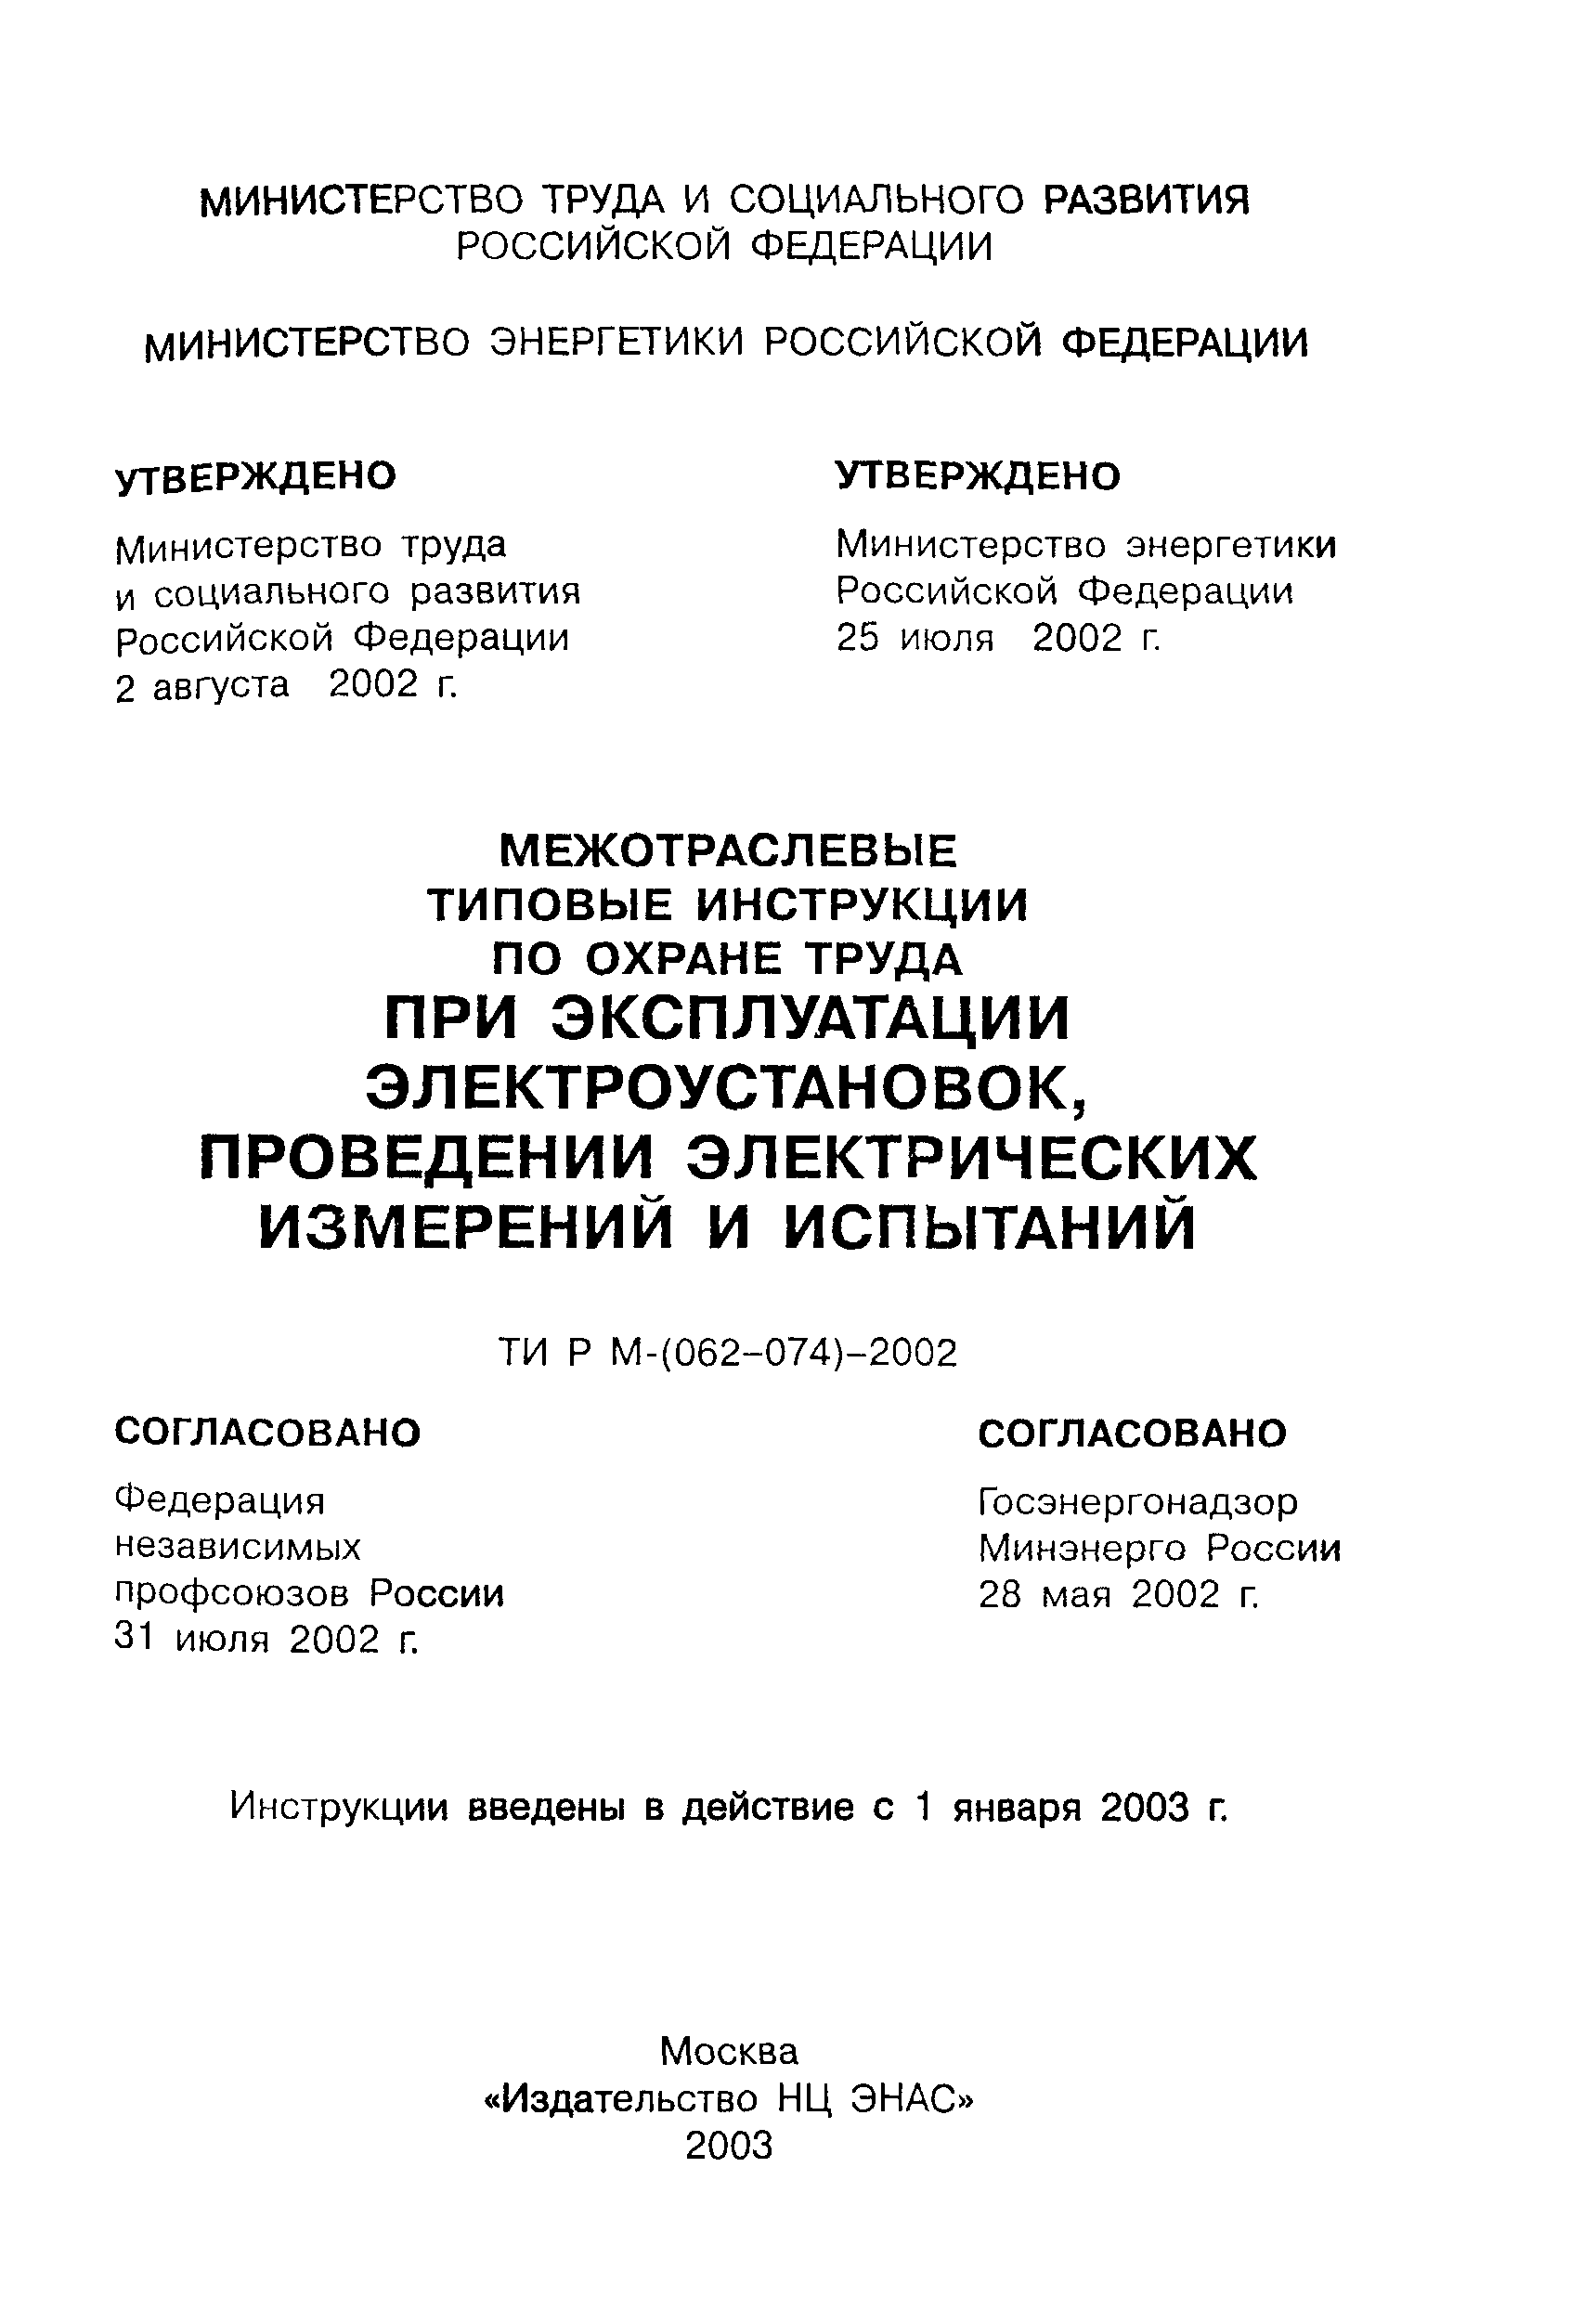 ТИ Р М-064-2002